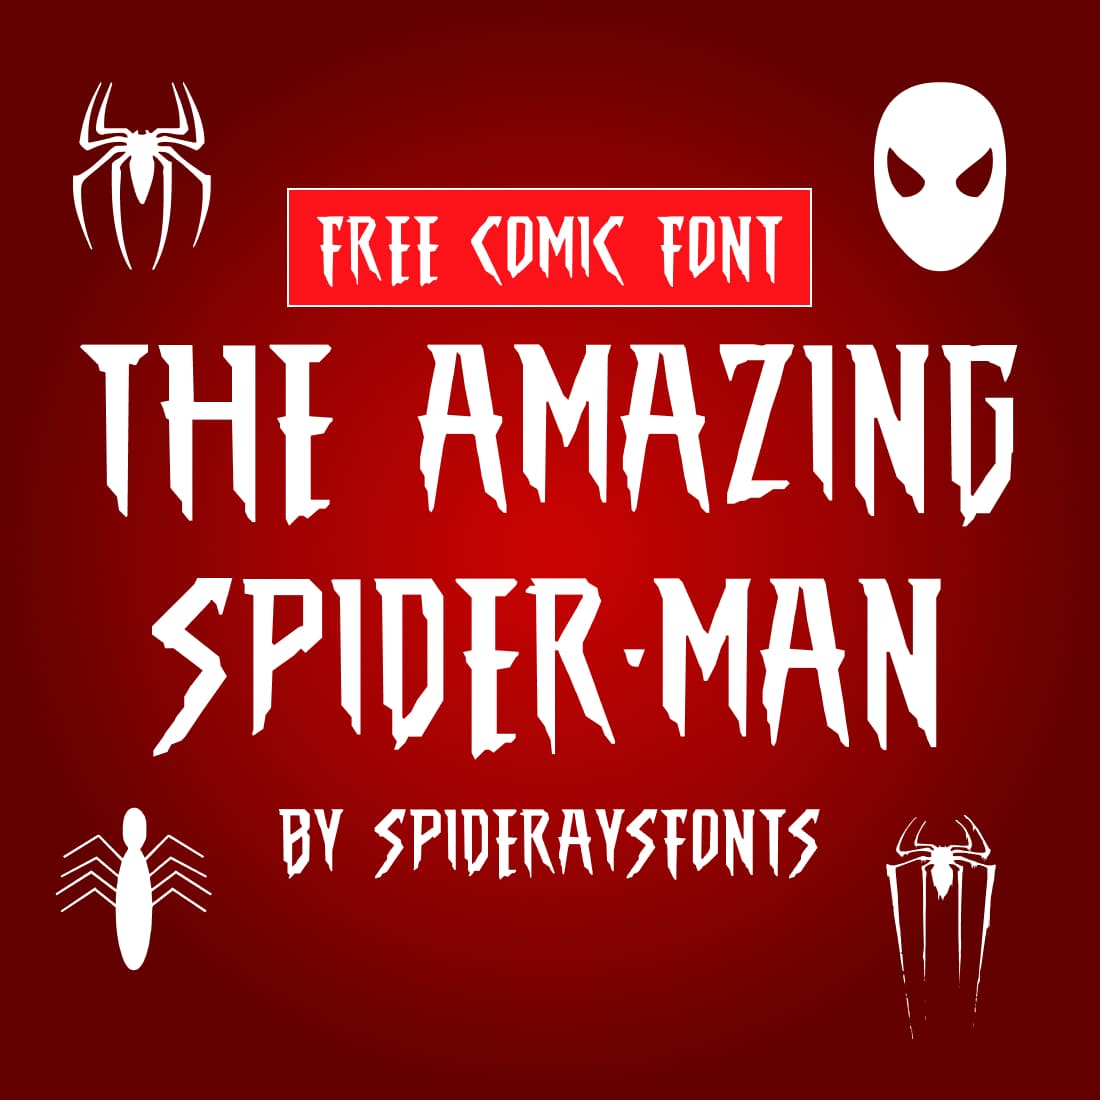 A font for Halloween or other creepy events.